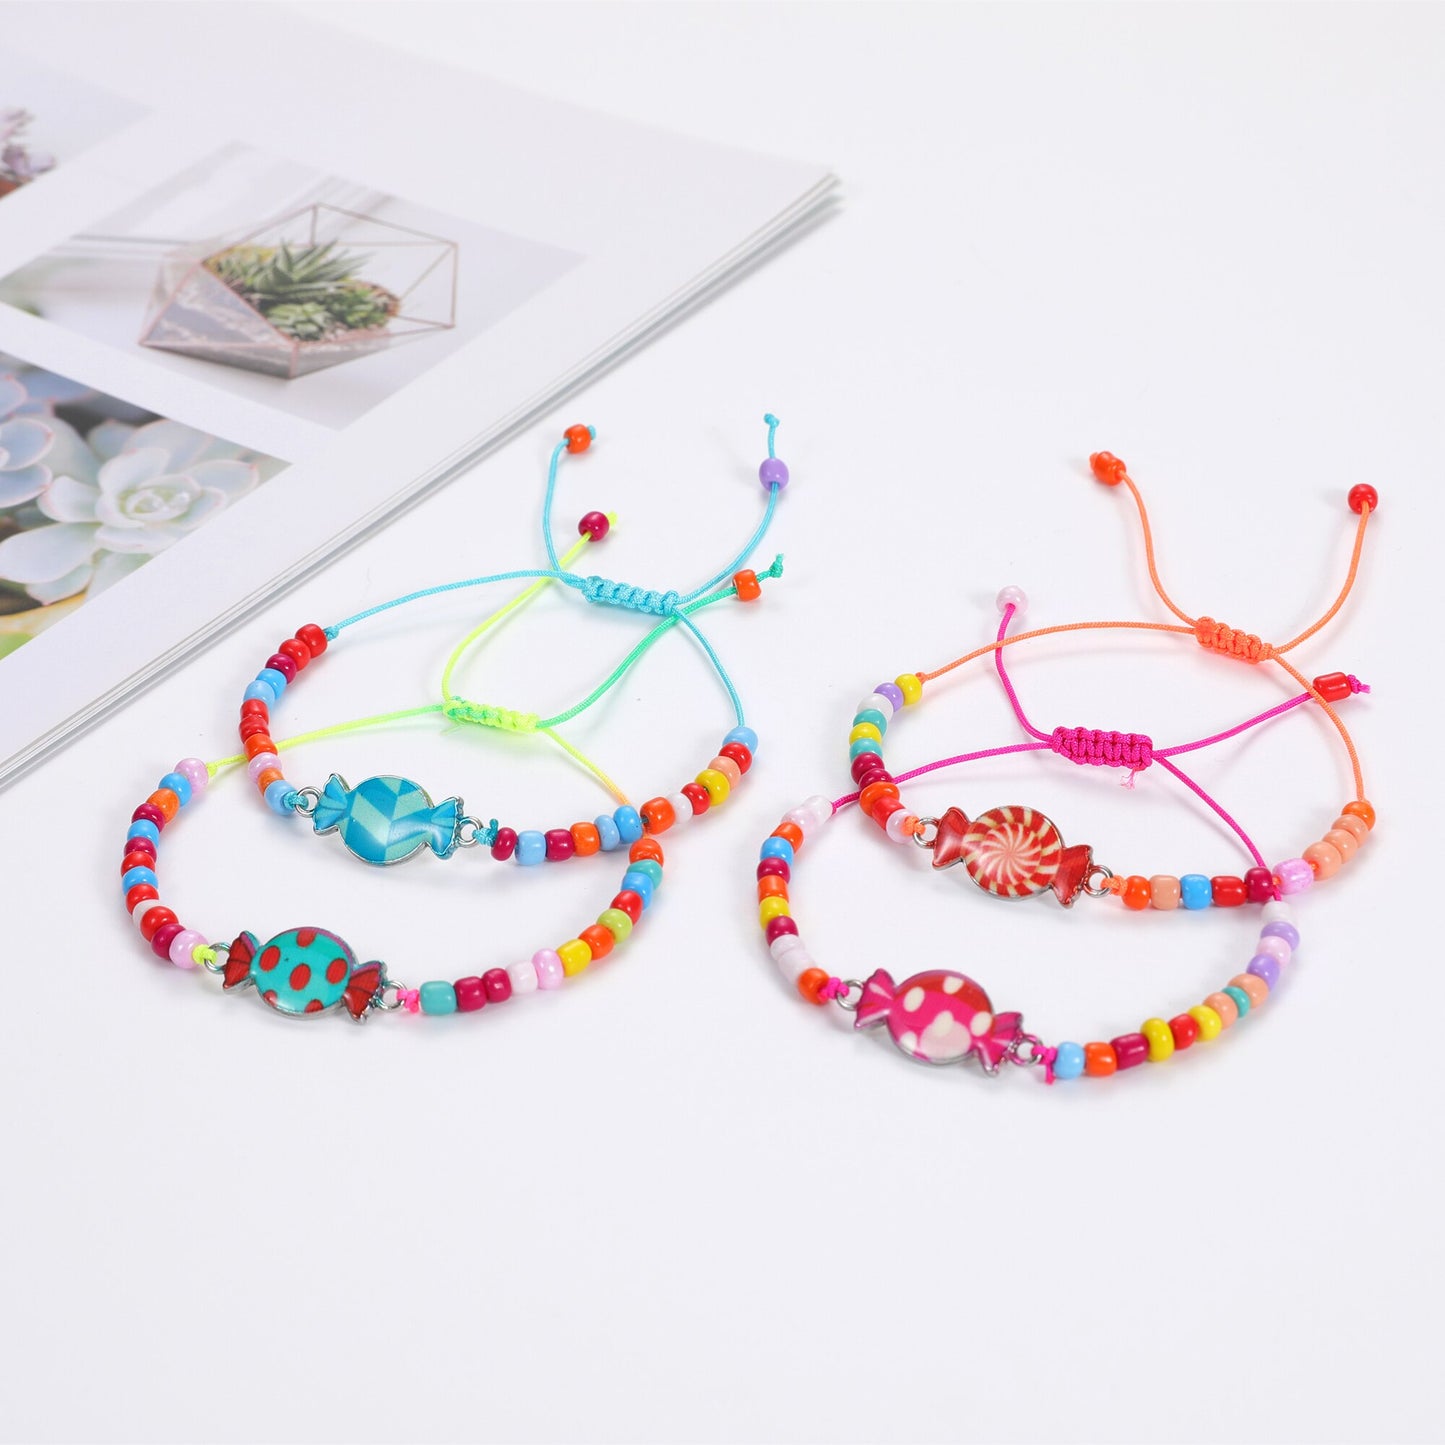 12 Pcs Colorful Cute Candy Charm Bracelet for Girl Kids Handmade Rice Bead Braided Chain Friendship BFF Gifts